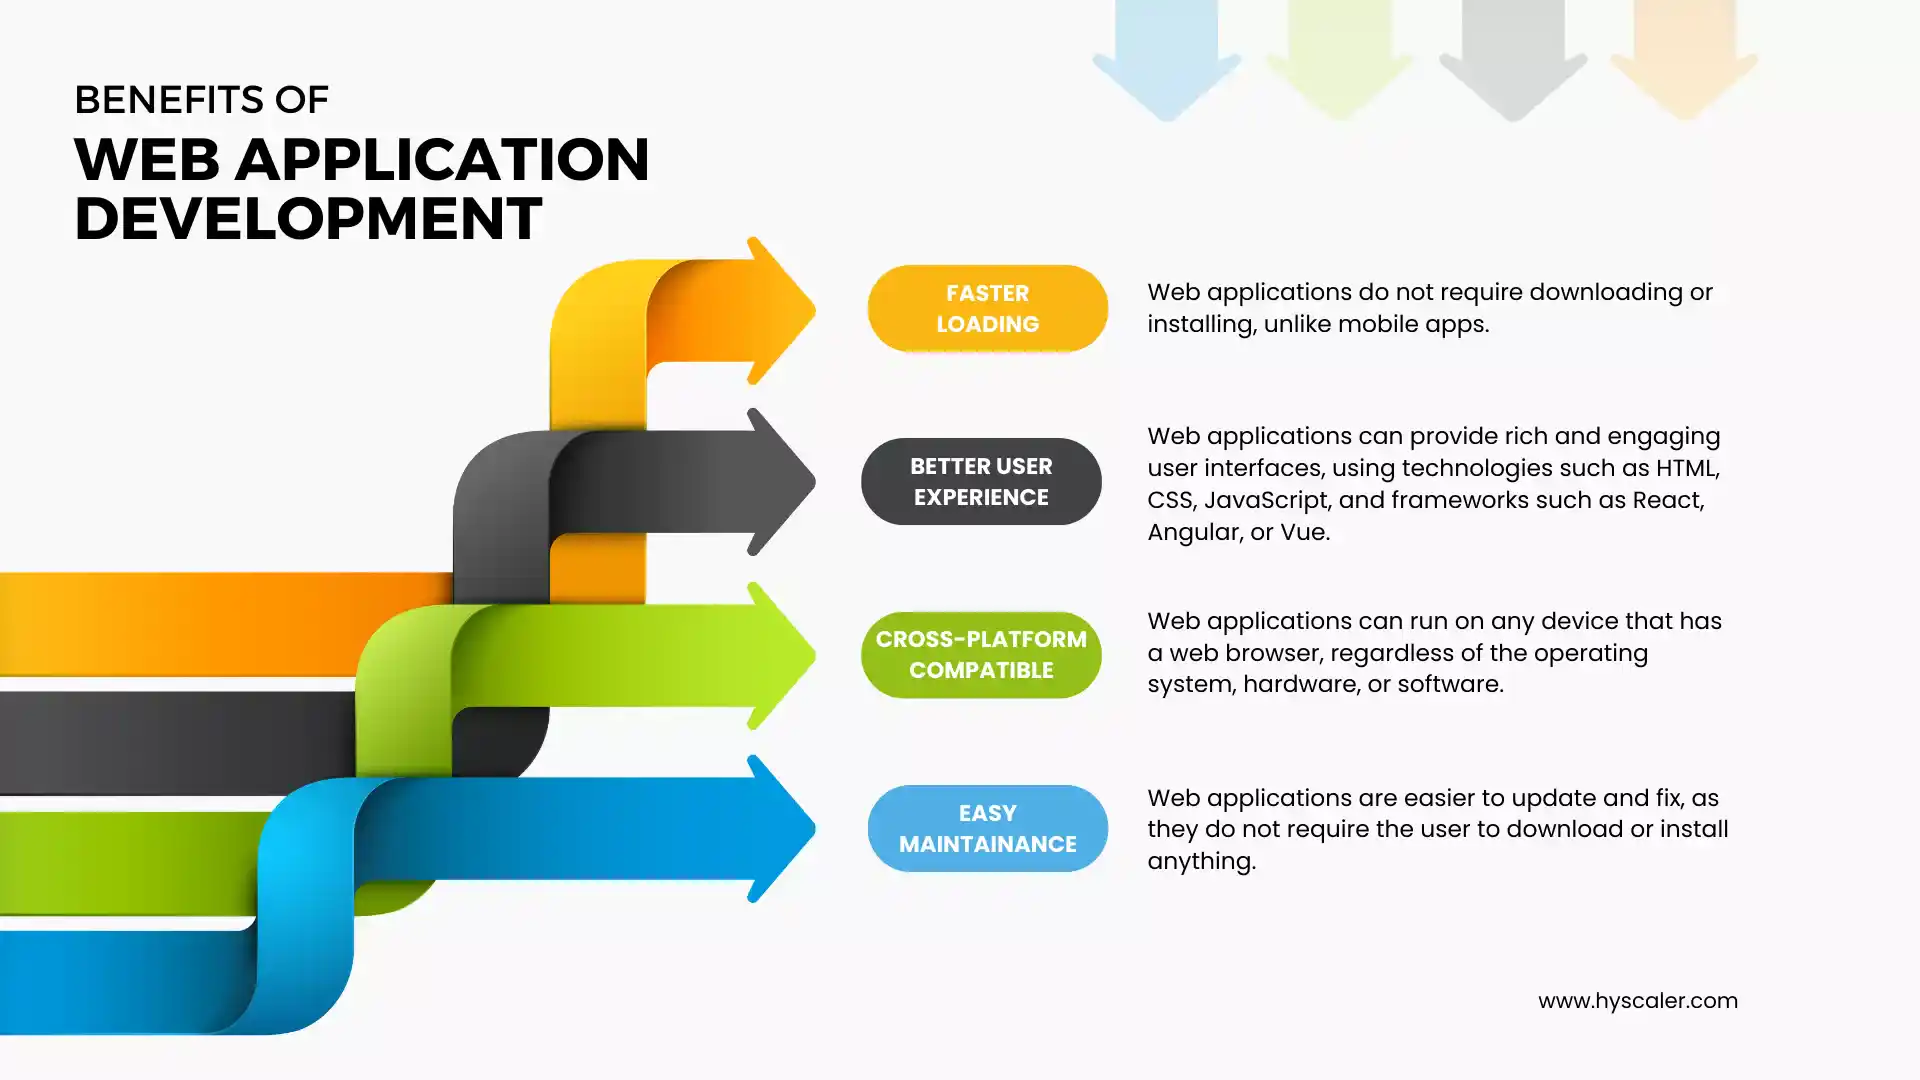 What is the need for web application development?